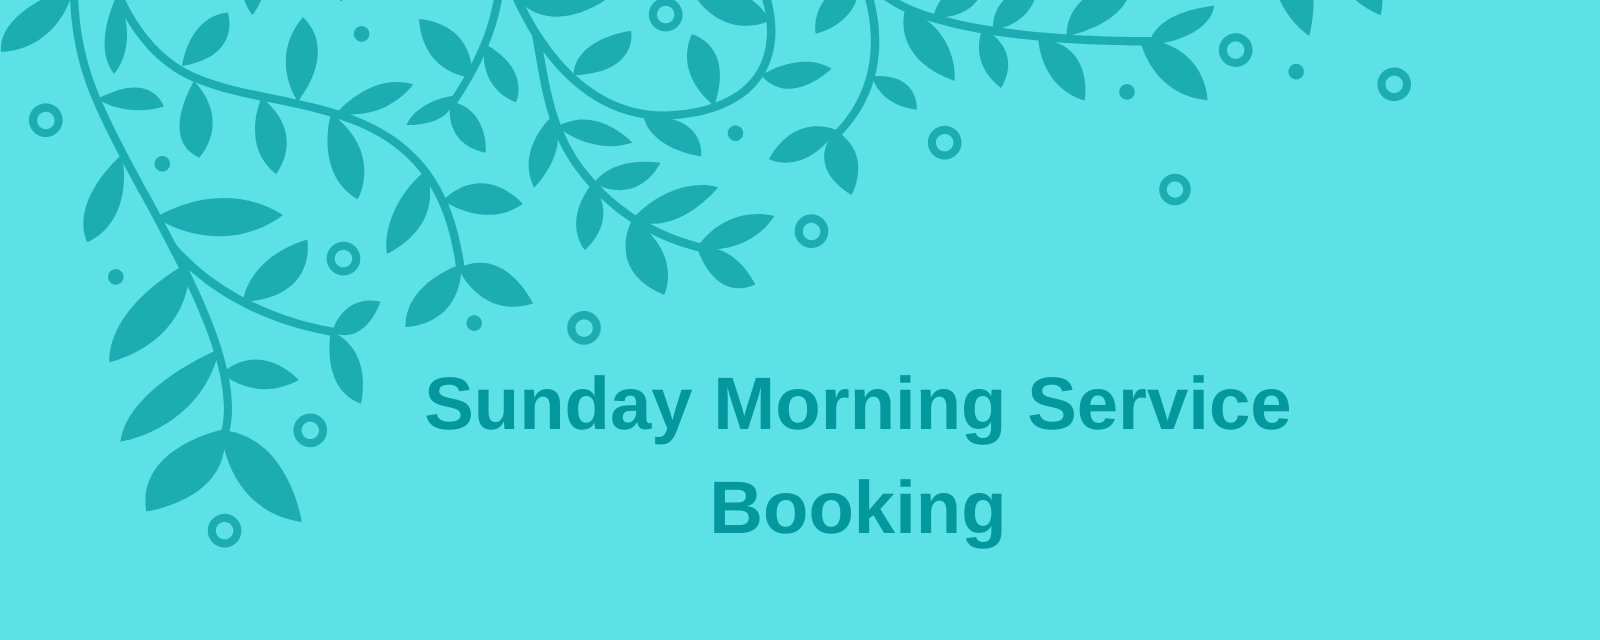 Service booking